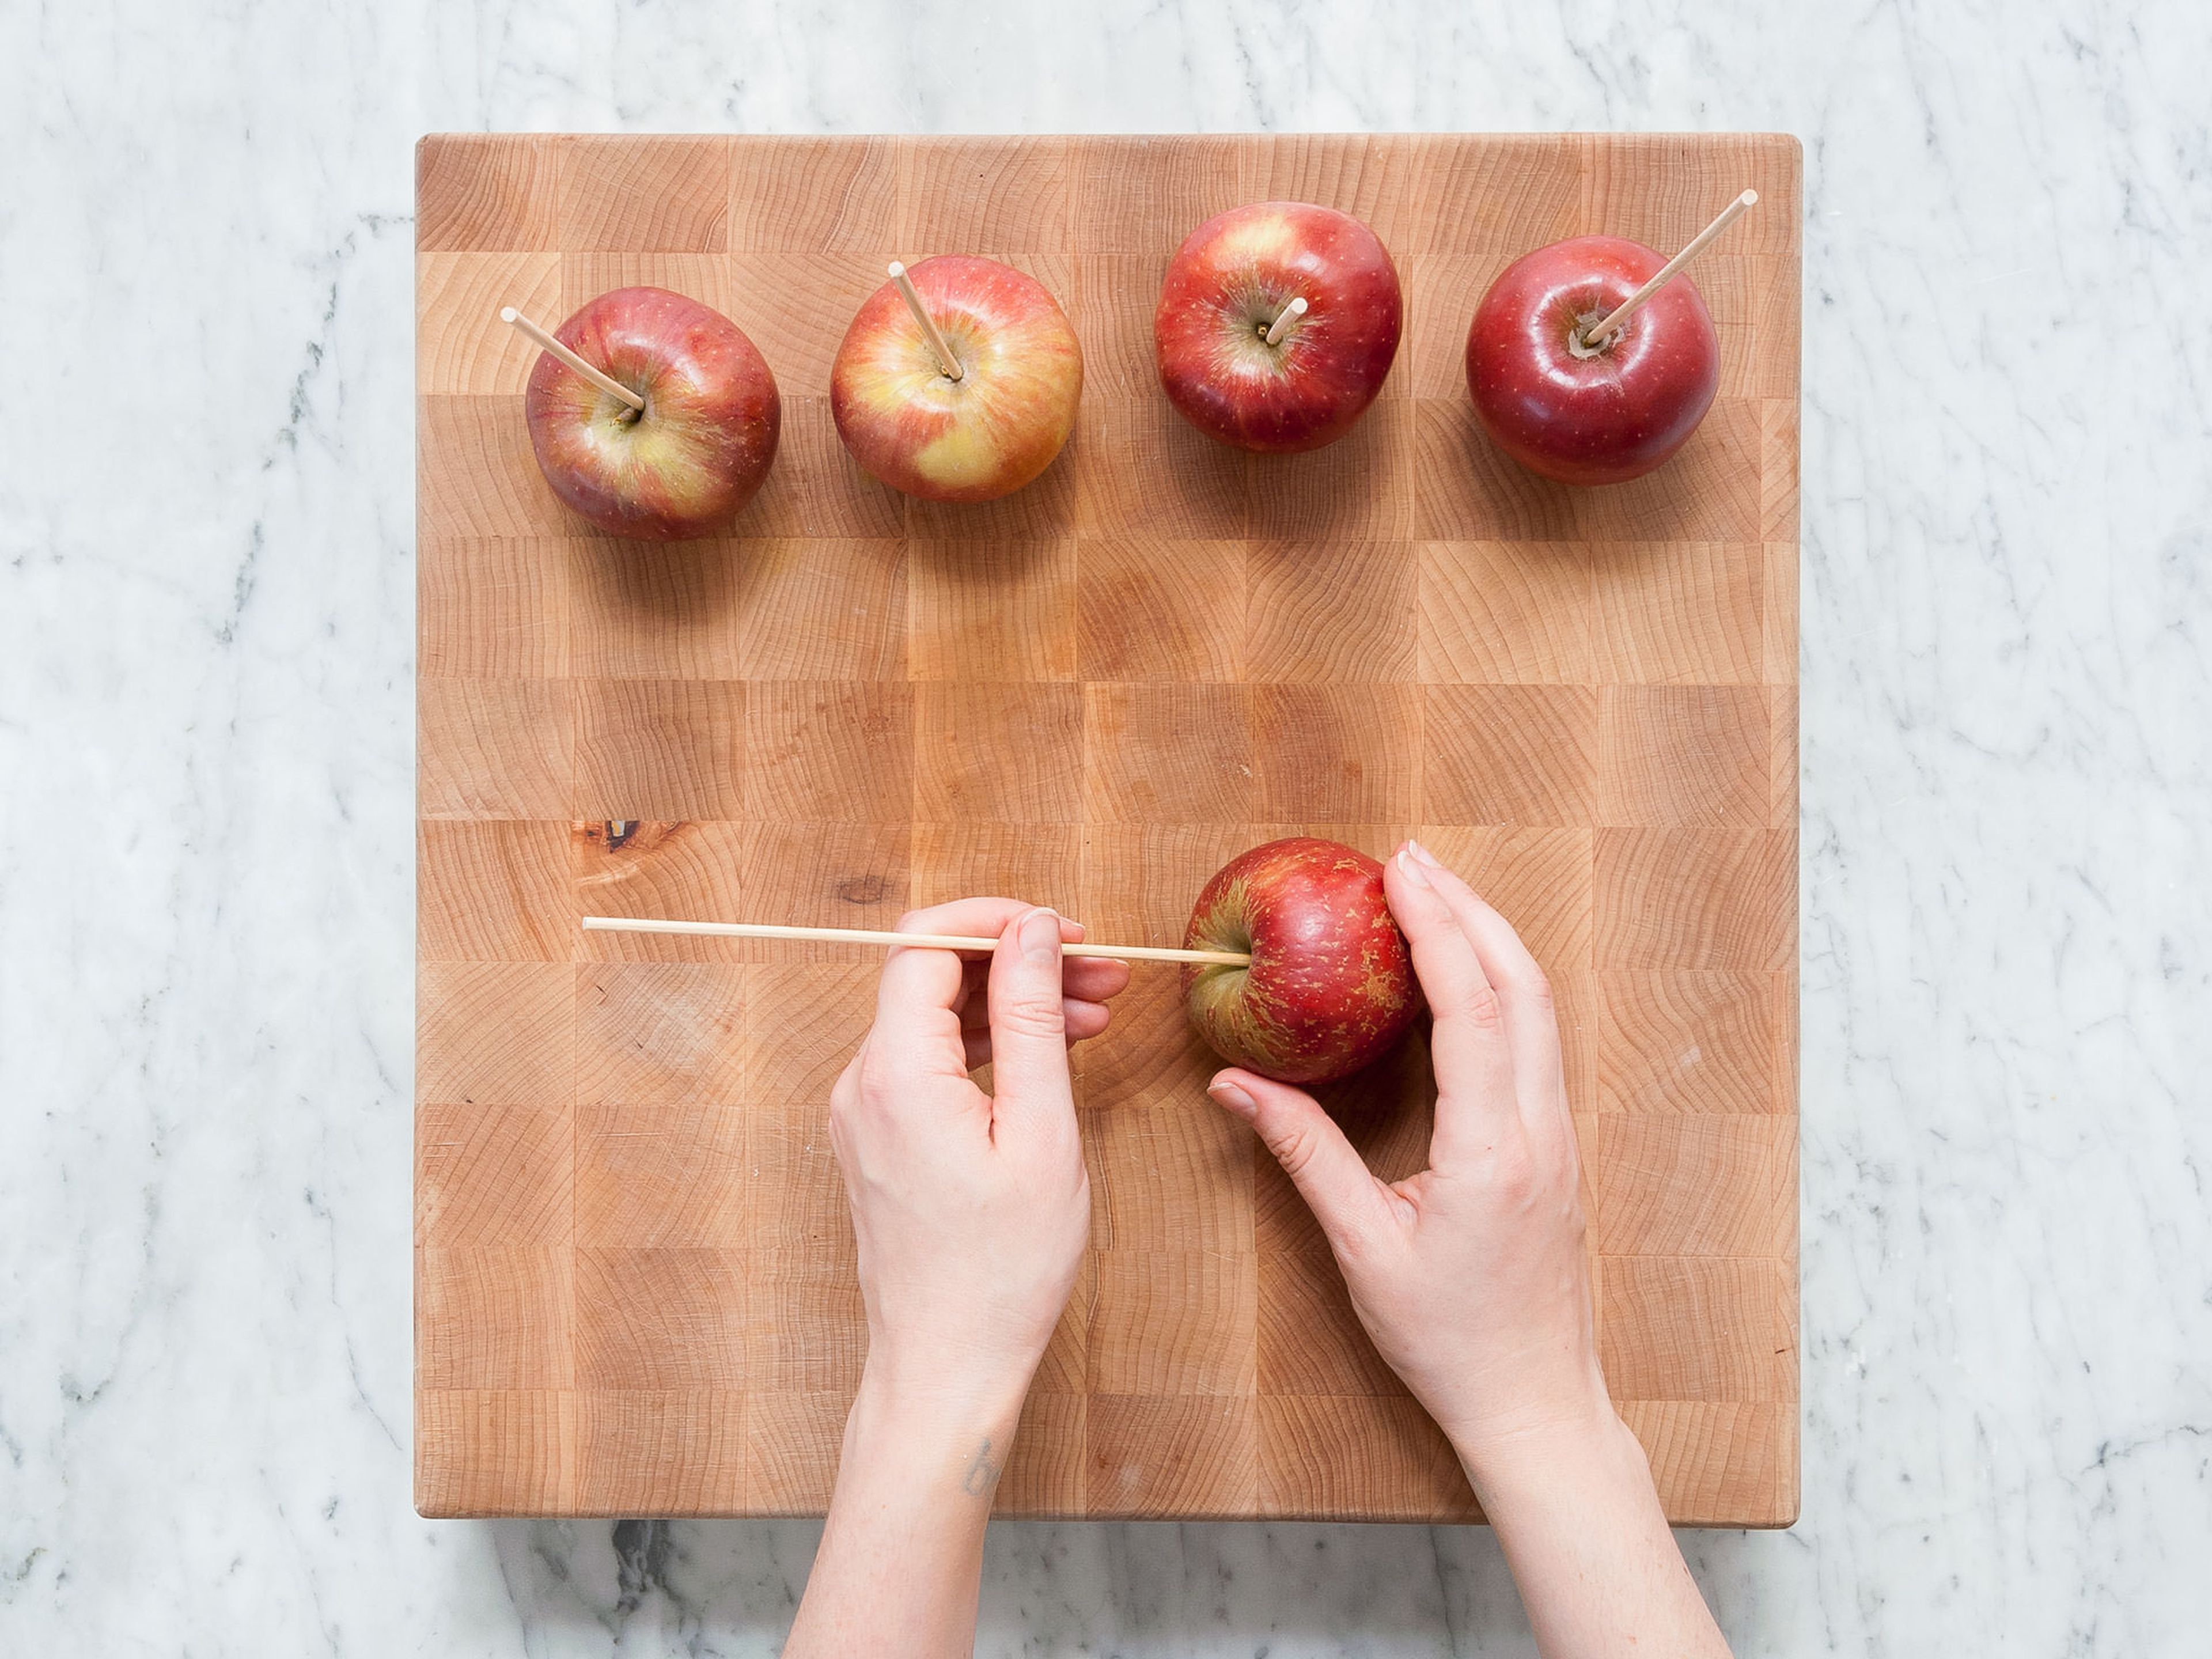 Wash apples, remove stems, and press a wooden skewers into each stem-end of the apples. Set aside.